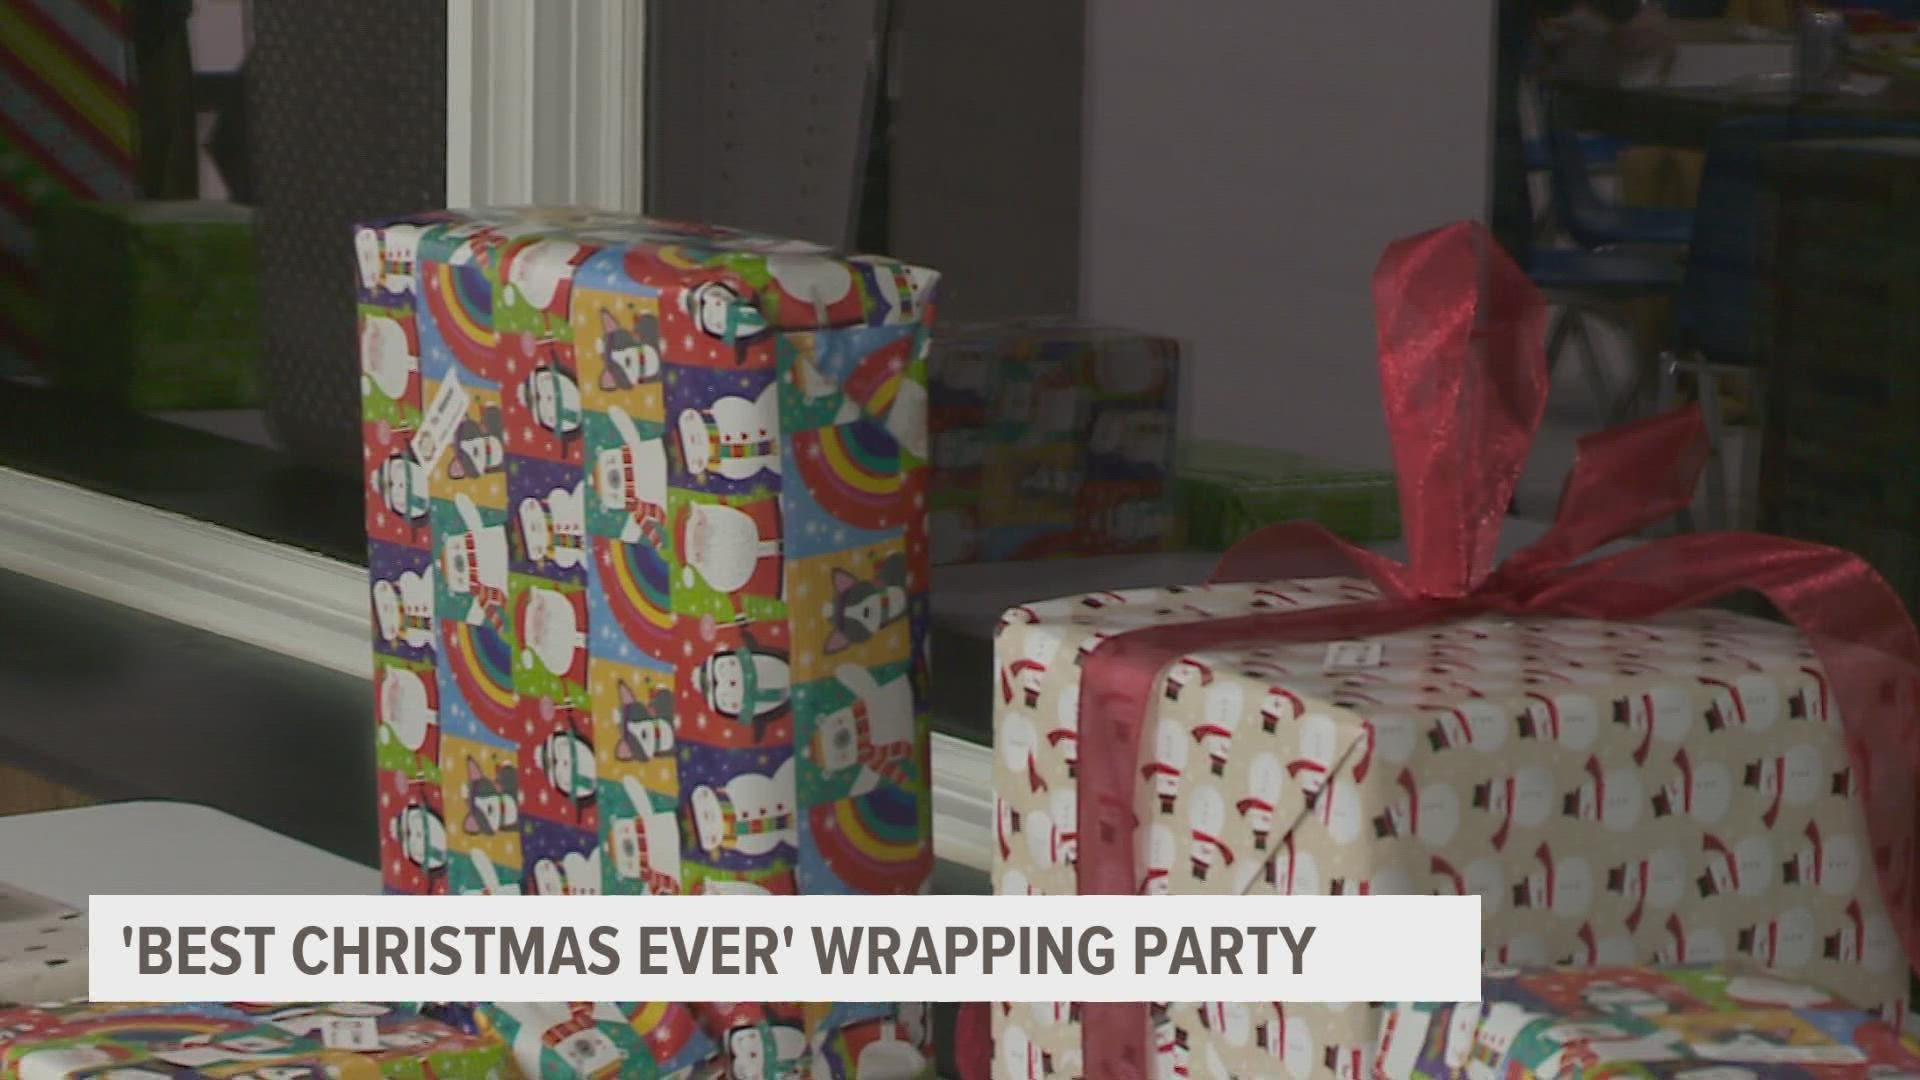 The organization Best Christmas Ever is giving Christmas presents to many families this year and held a wrapping party this evening.